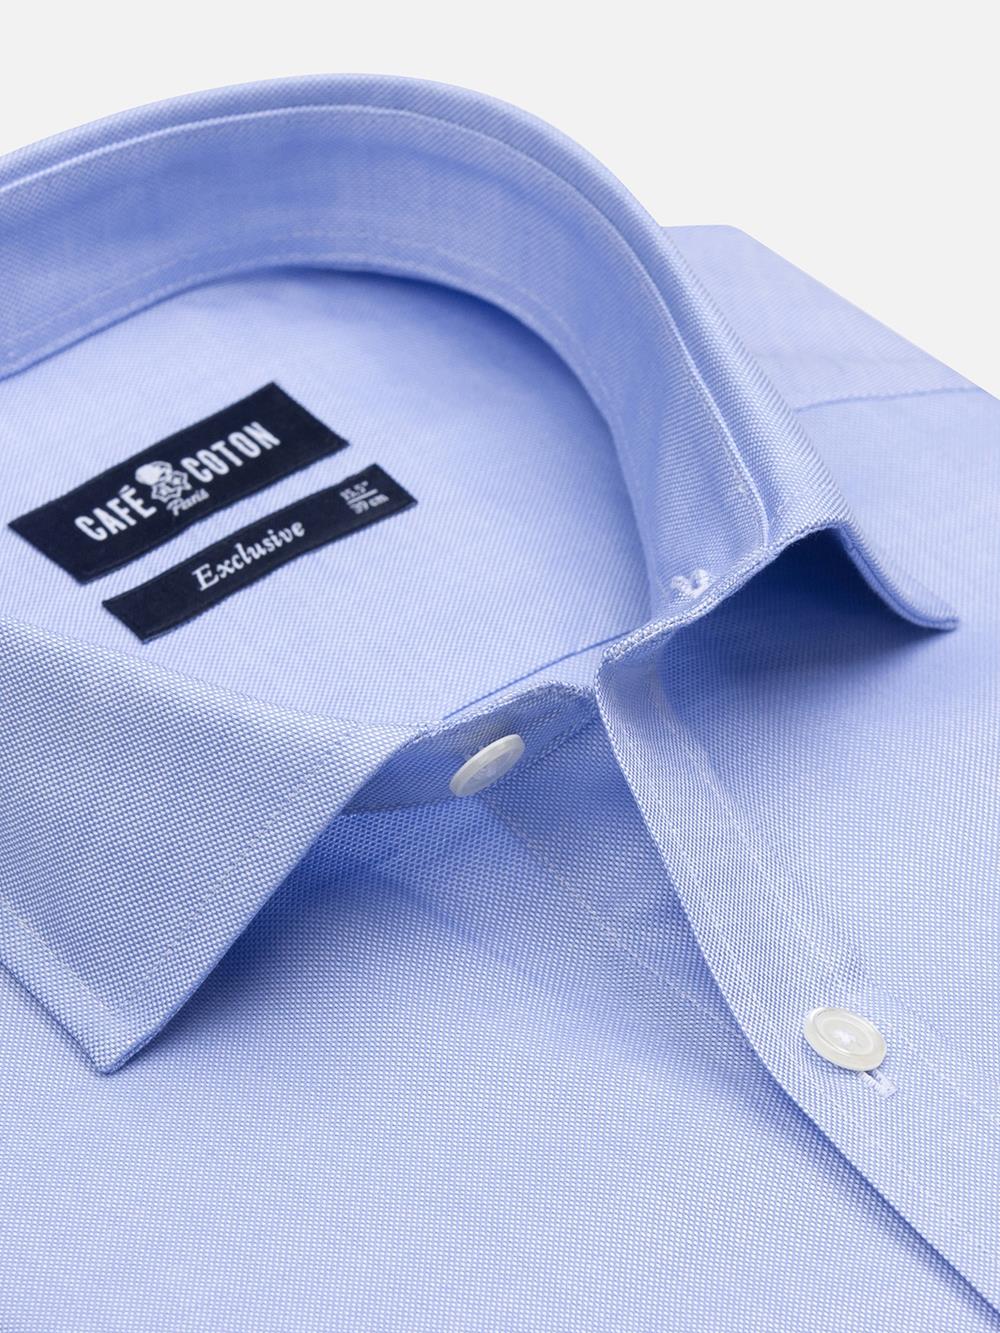 Sky oxford slim fit shirt - Double Cuffs